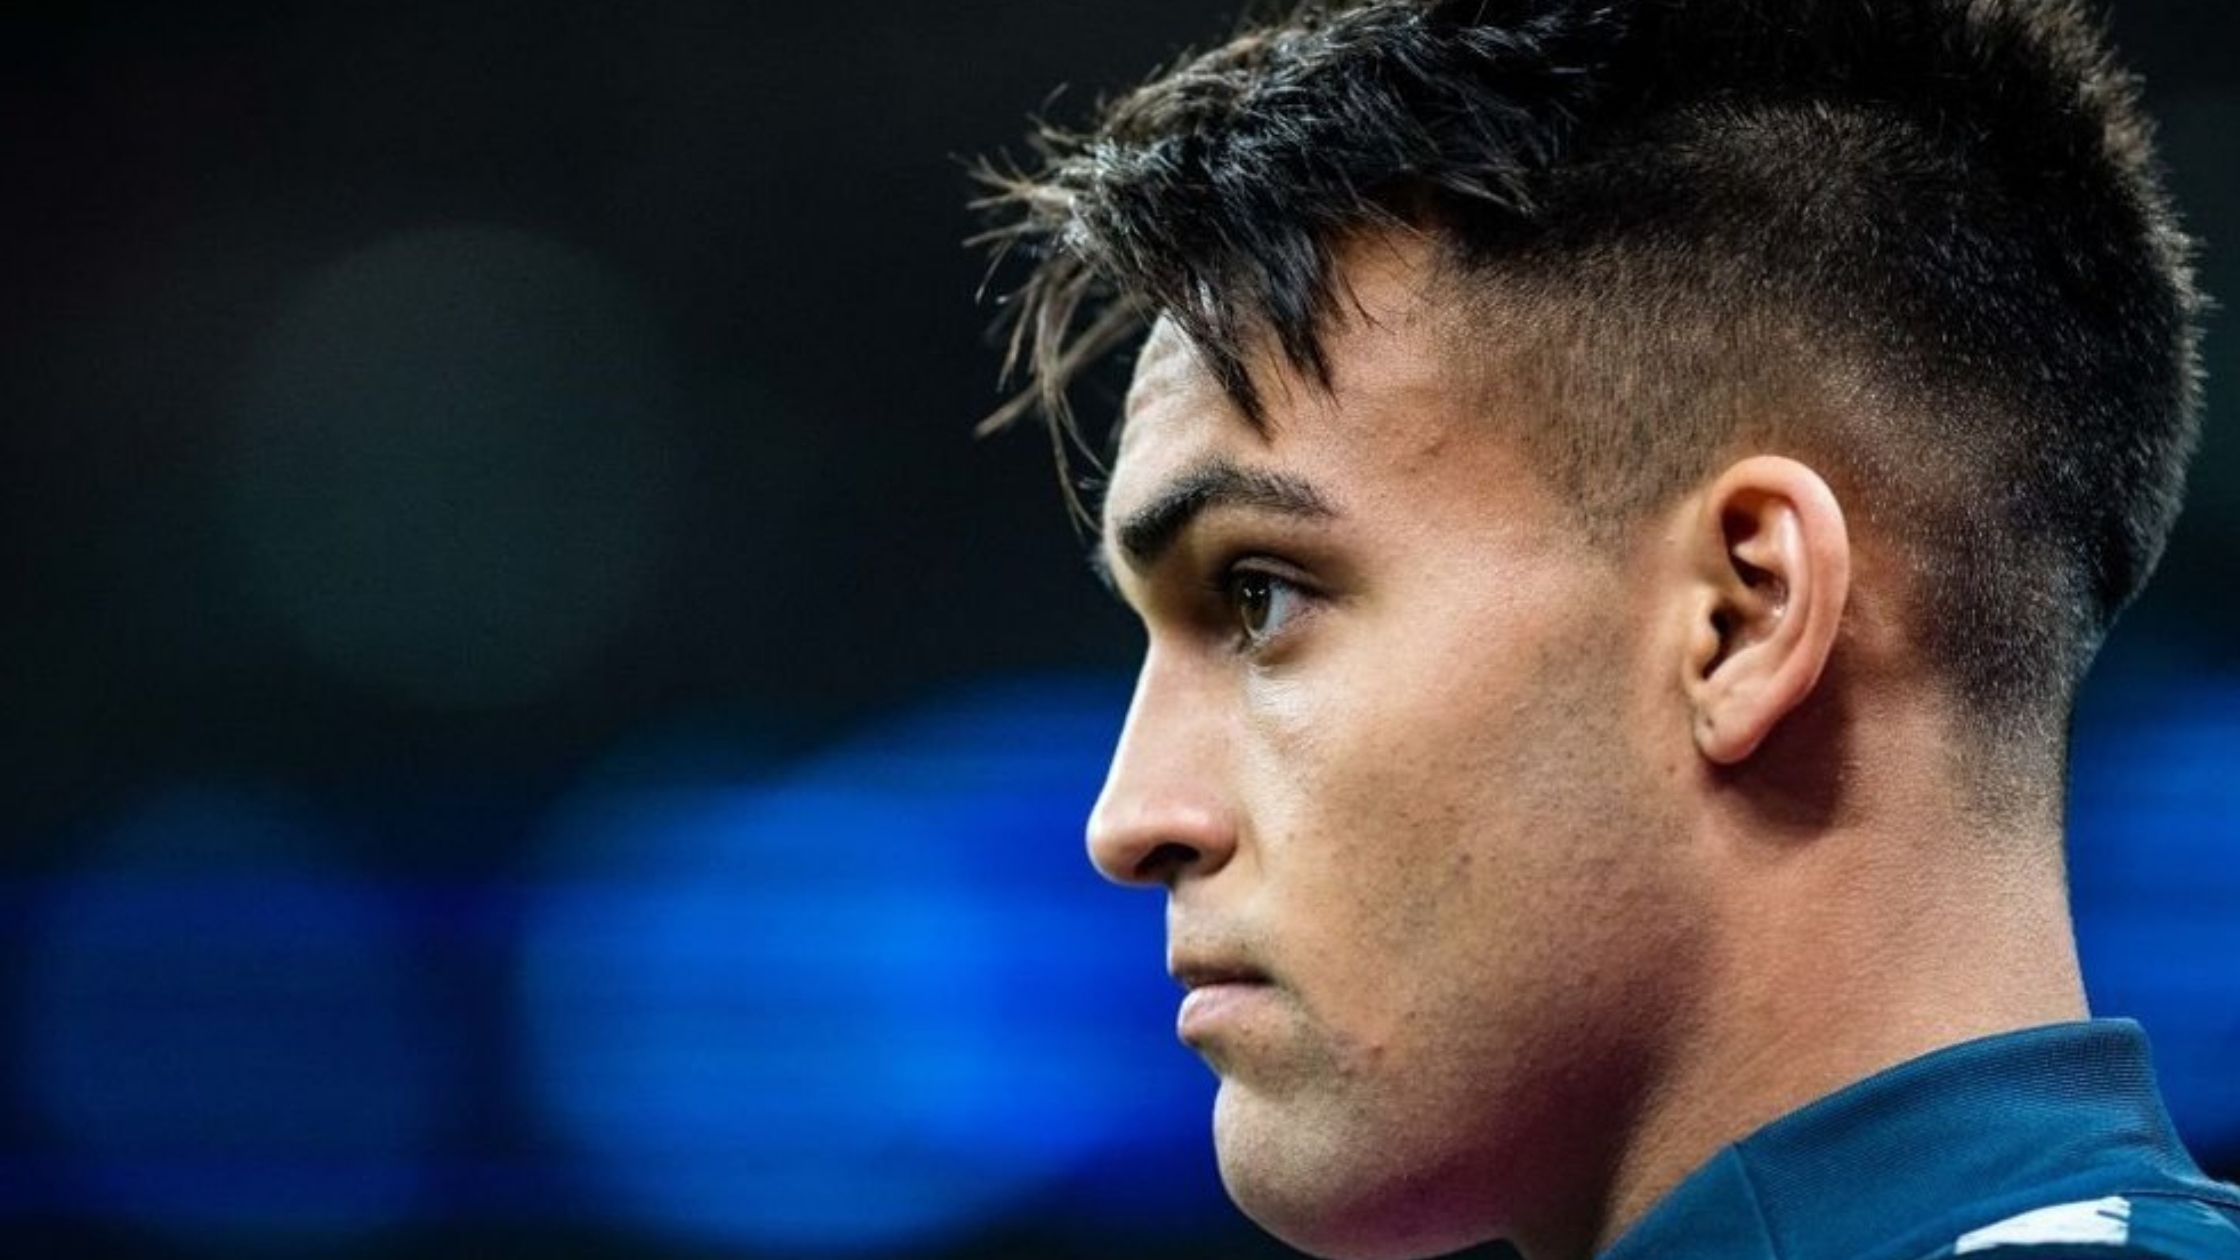 Lautaro Martínez: age, height, footballer father, sexy girlfriend. Value and curiosity